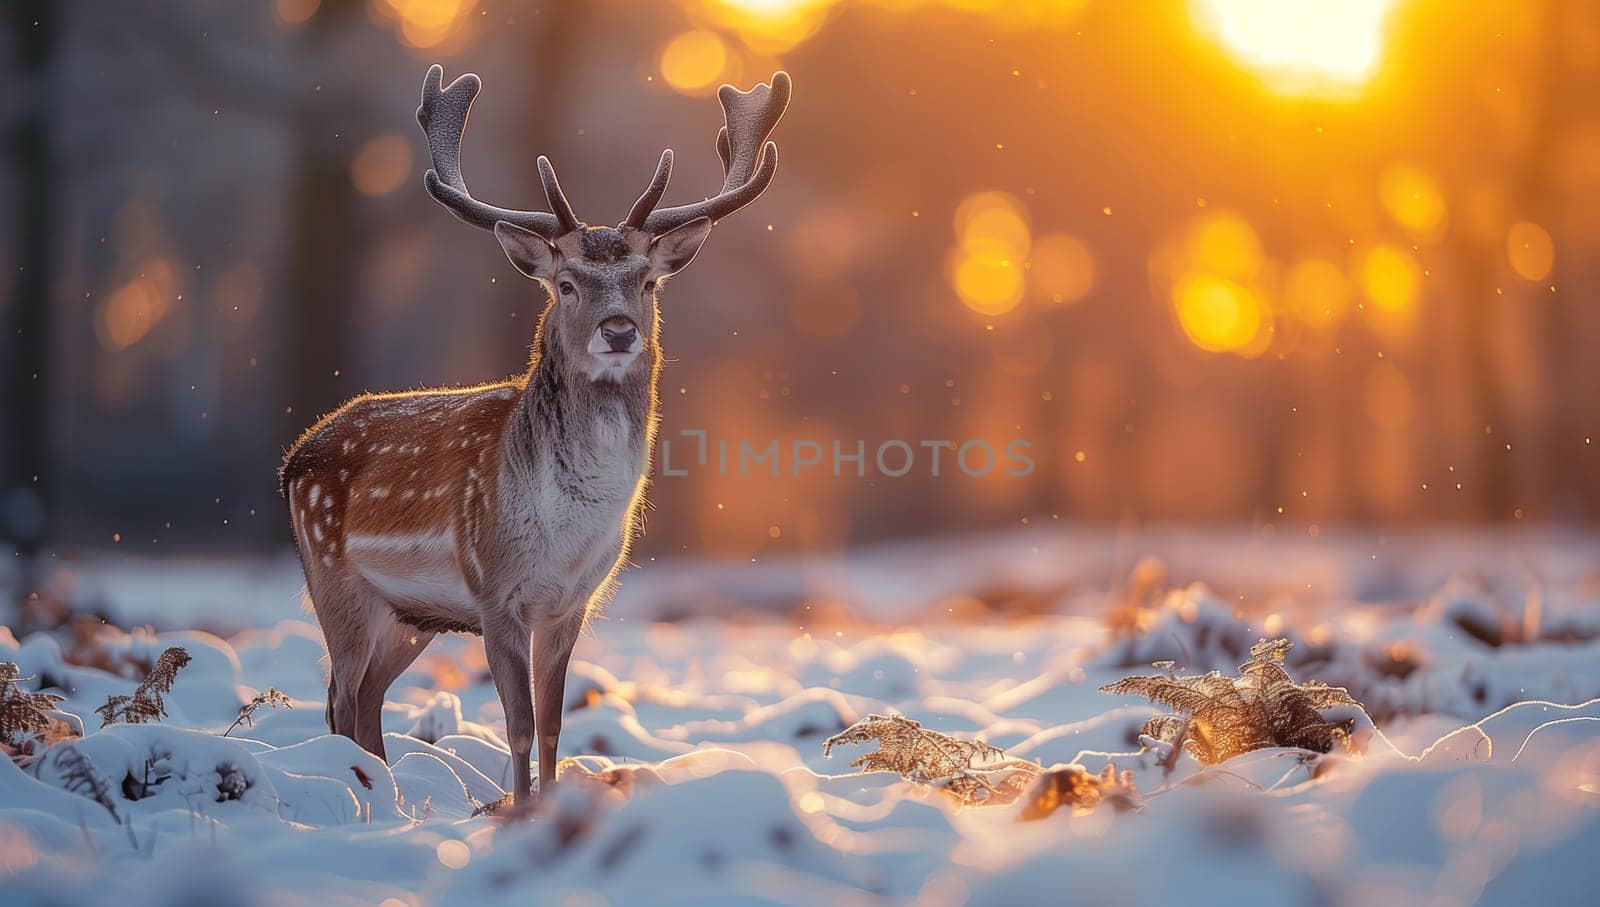 A fawn deer with horn standing in freezing snow at sunset by richwolf